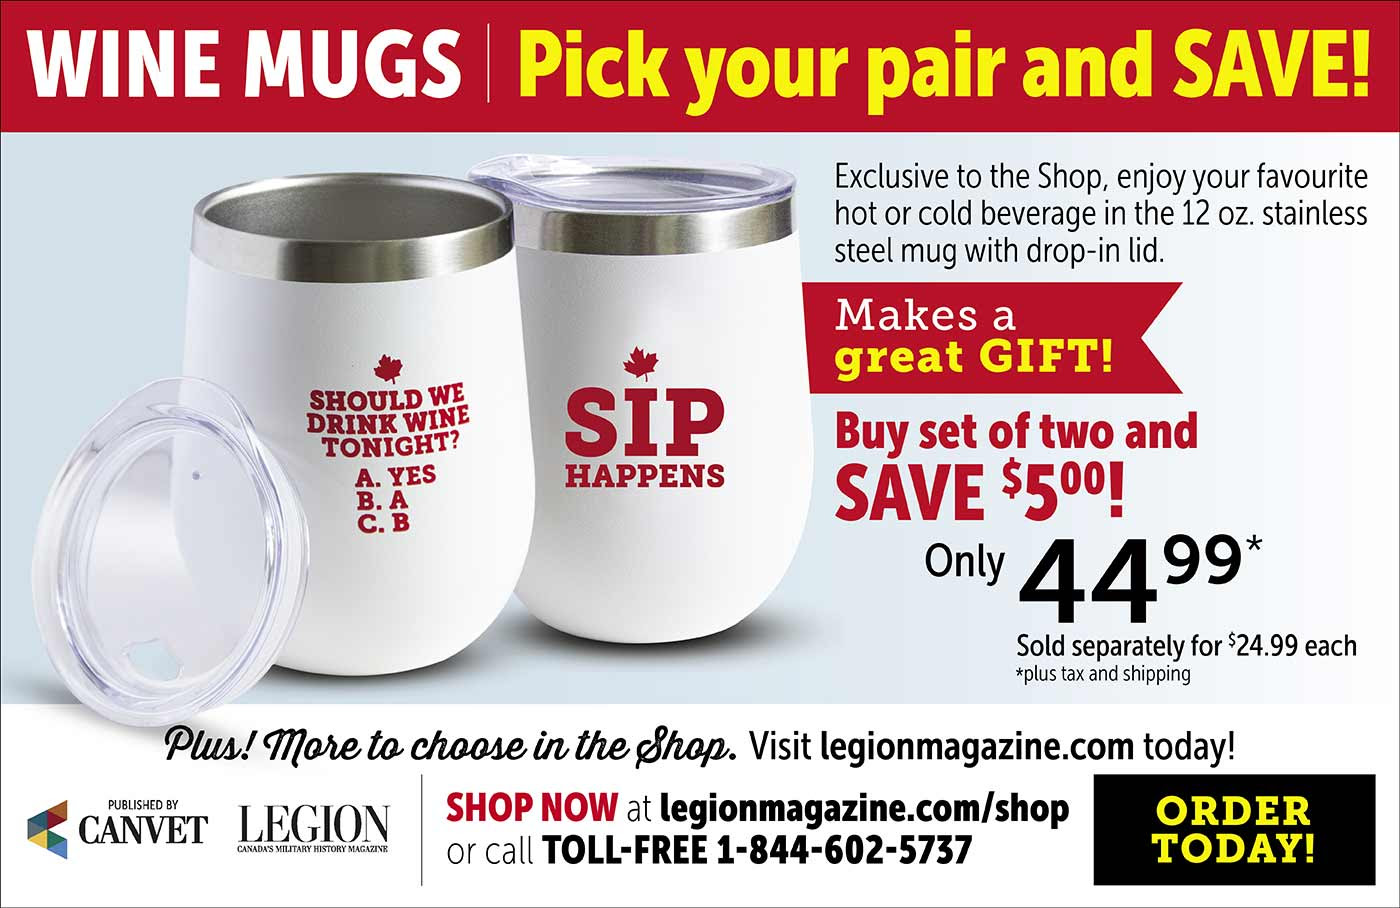 Exclusive to the Shop, enjoy your
favourite hot or cold beverage in the 12
oz stainless steel wine mugs. Order
today!